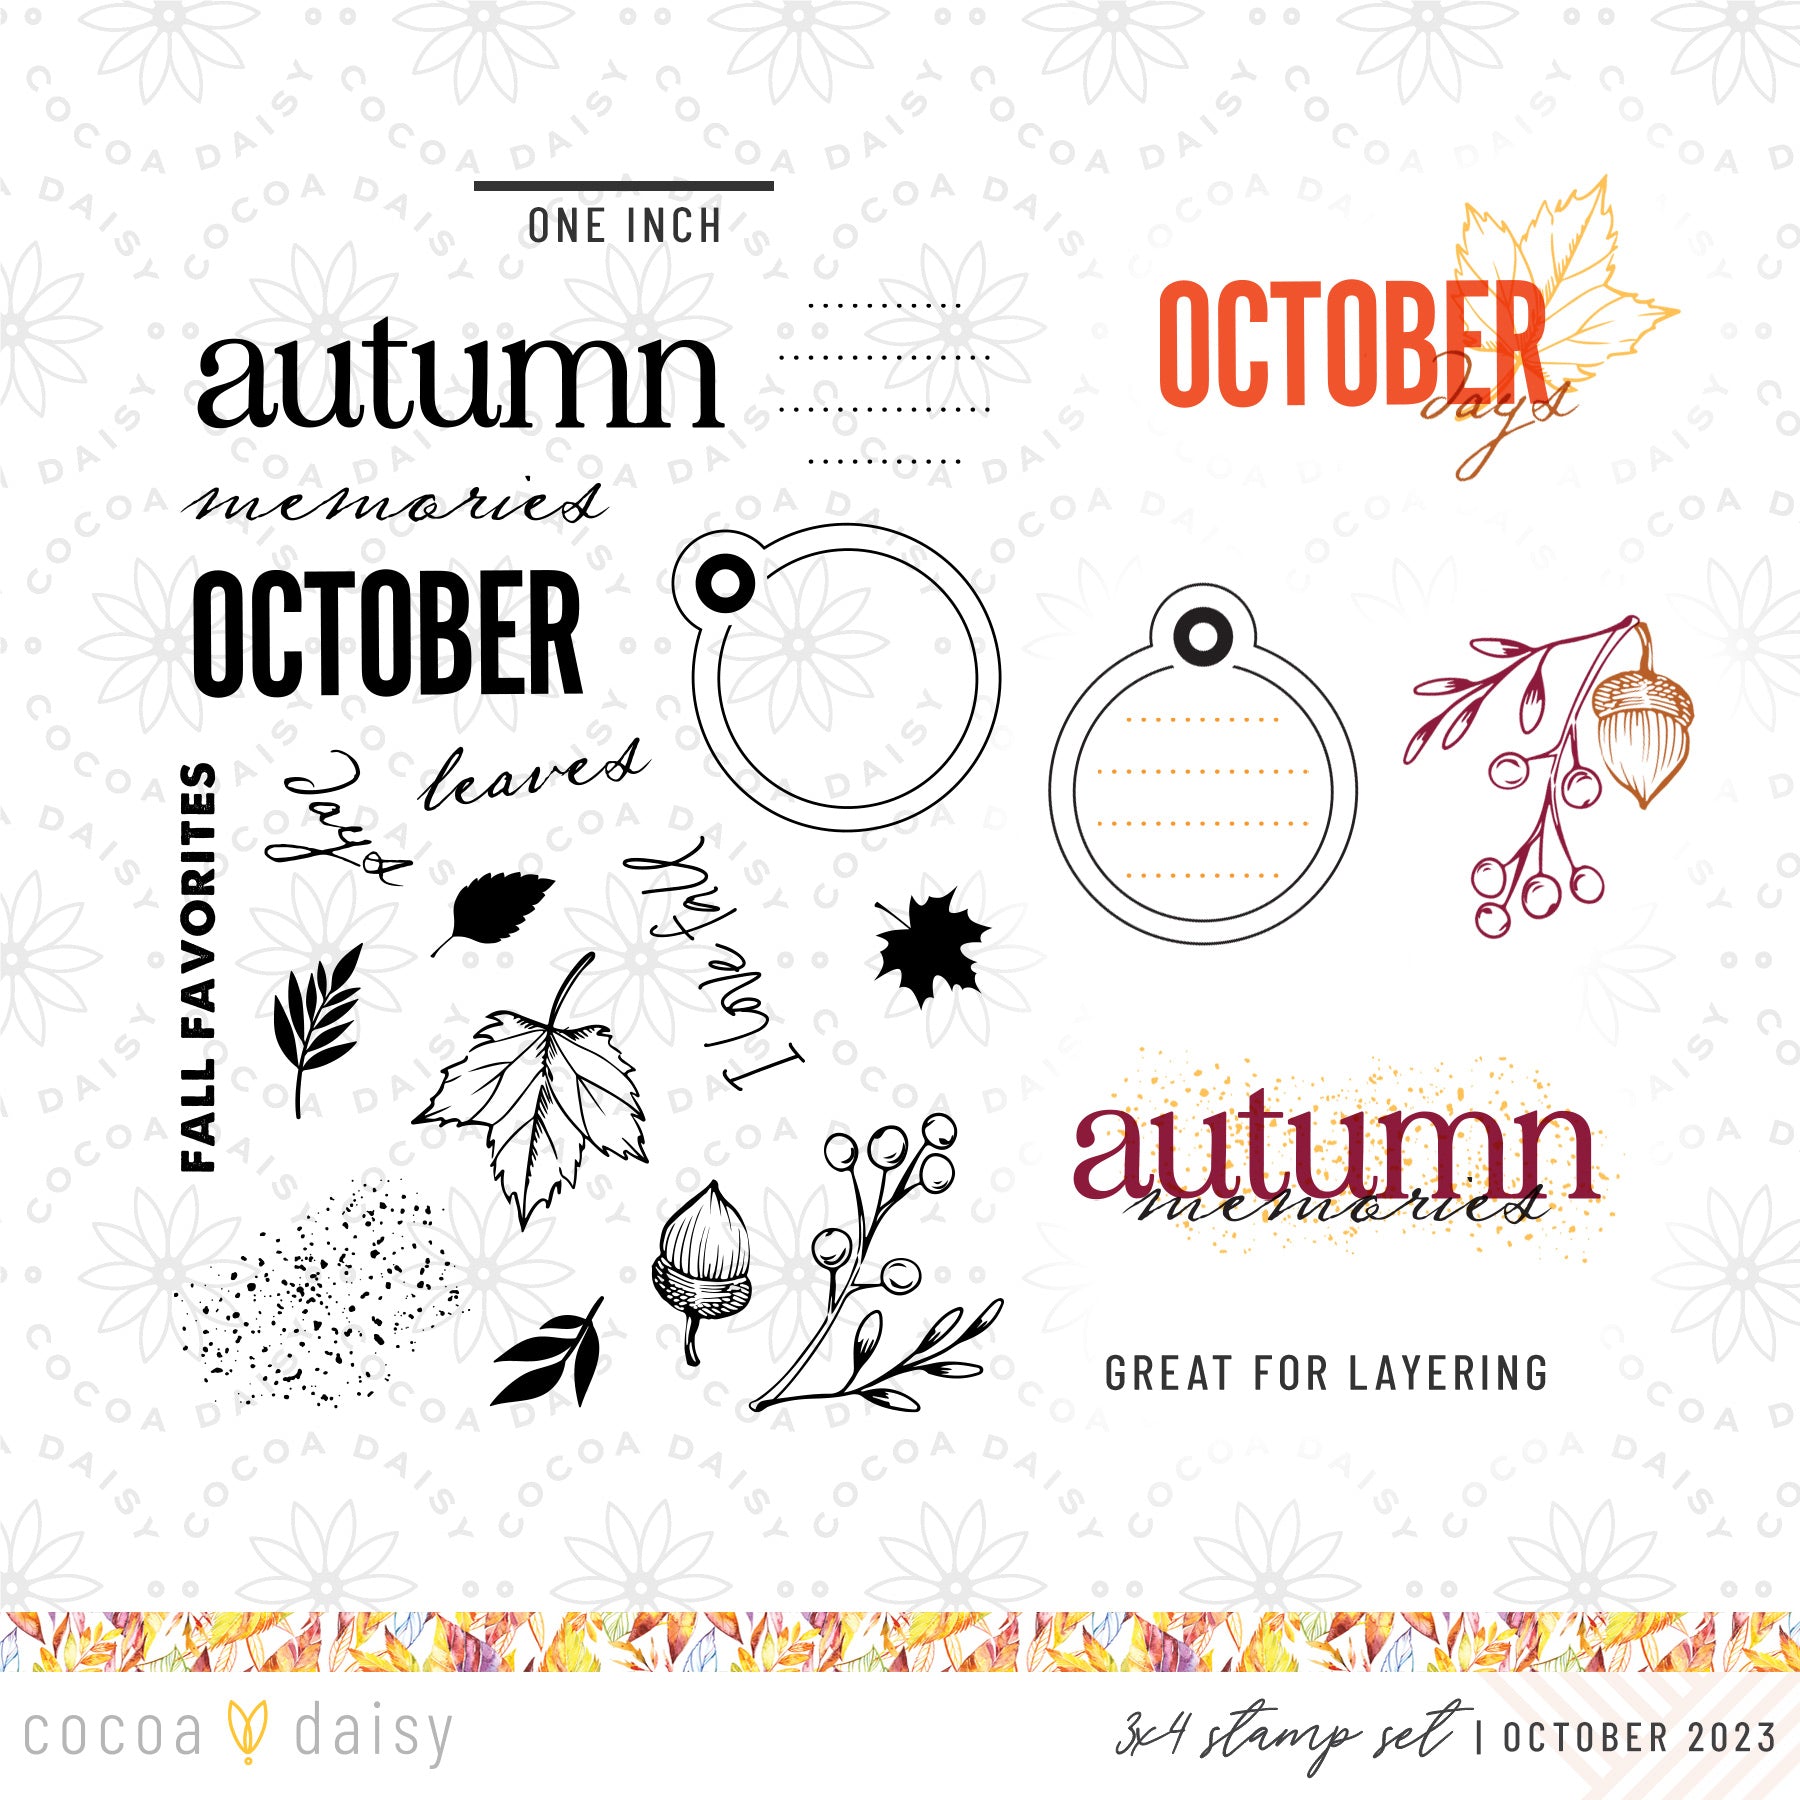 Autumn Whispers "October" Stamp from the MMK Kit